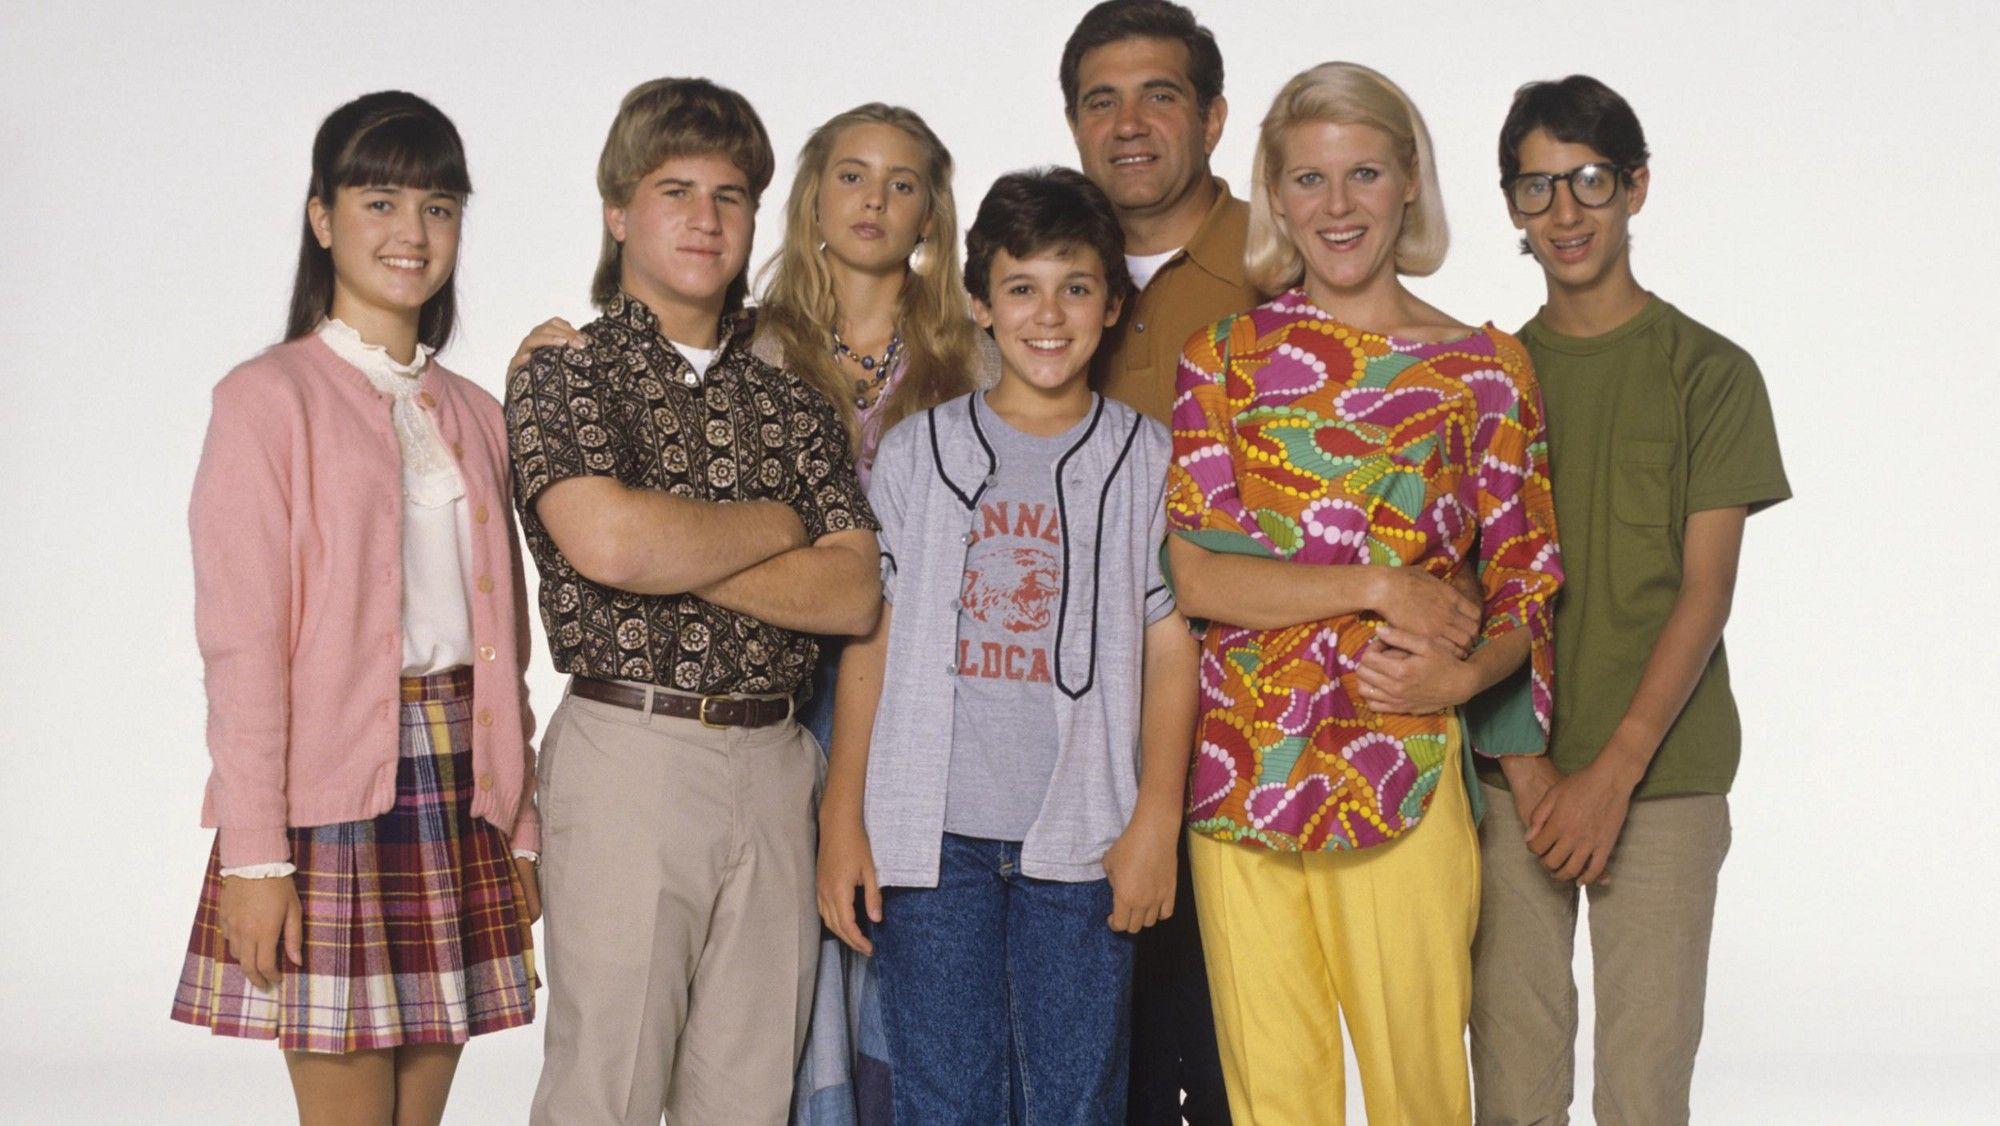 Check Out The Wonder Years Cast: Then And Now